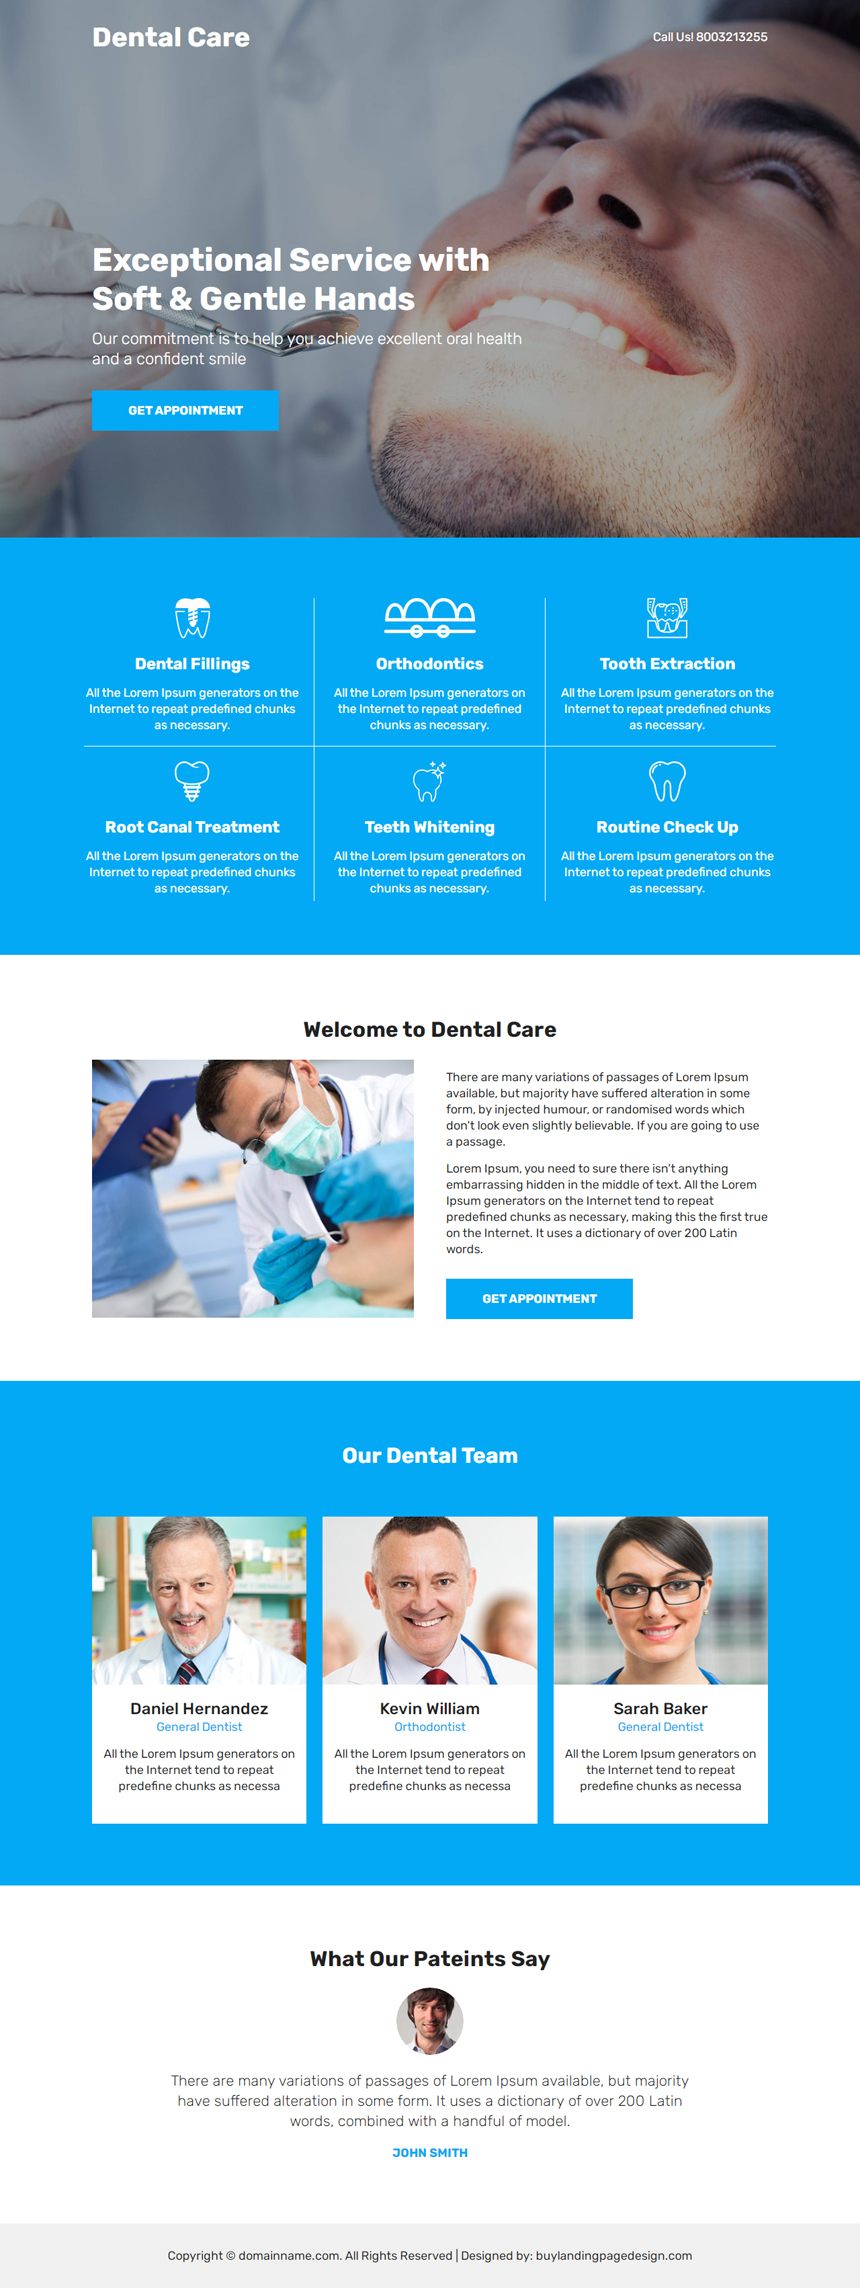 dental filling and tooth extraction service lead capture landing page